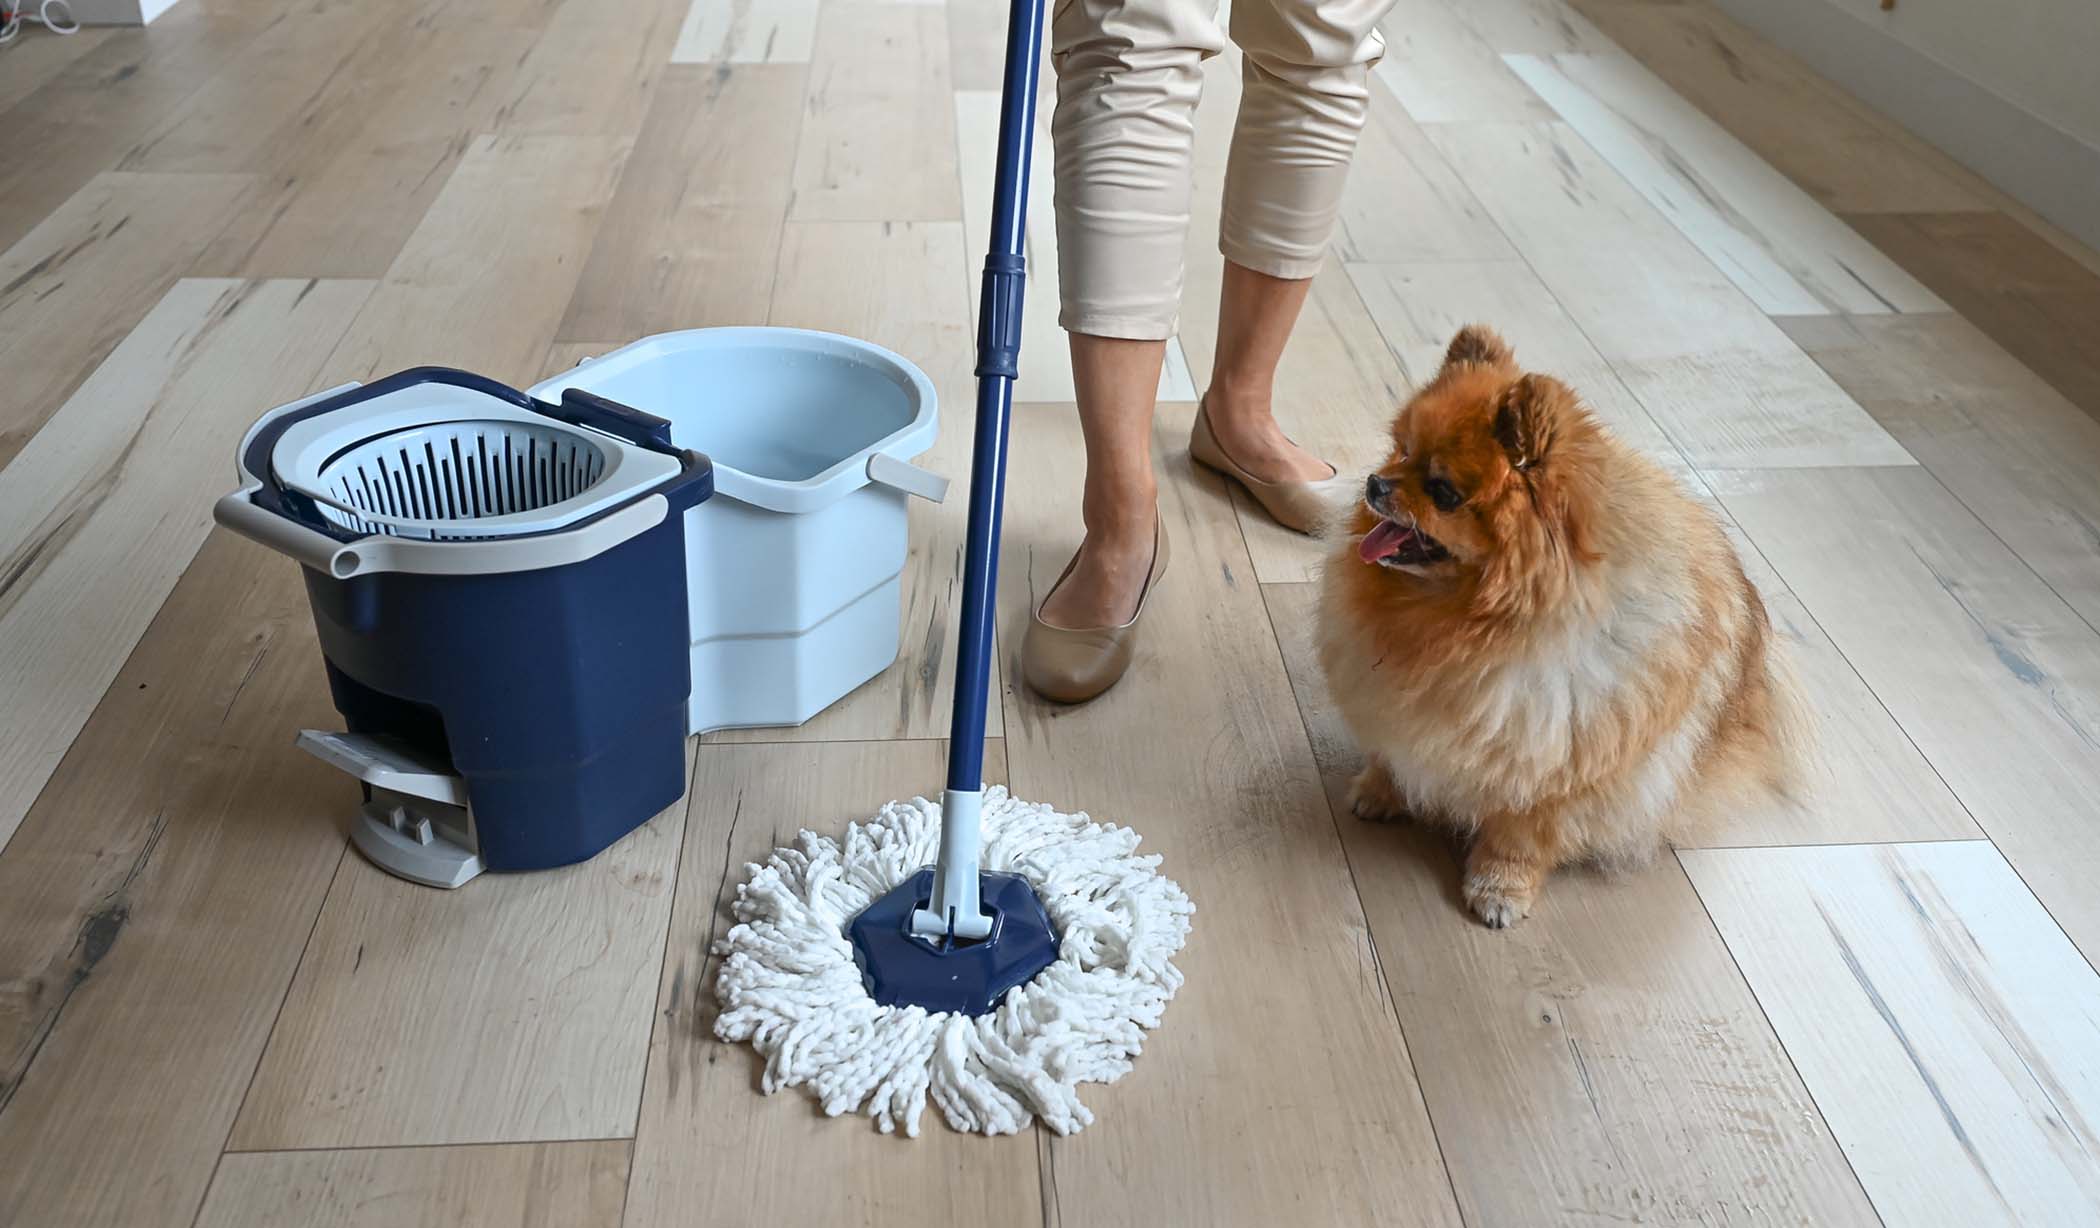 How to Clean Different Types of Floors with the Casabella Spin Mop